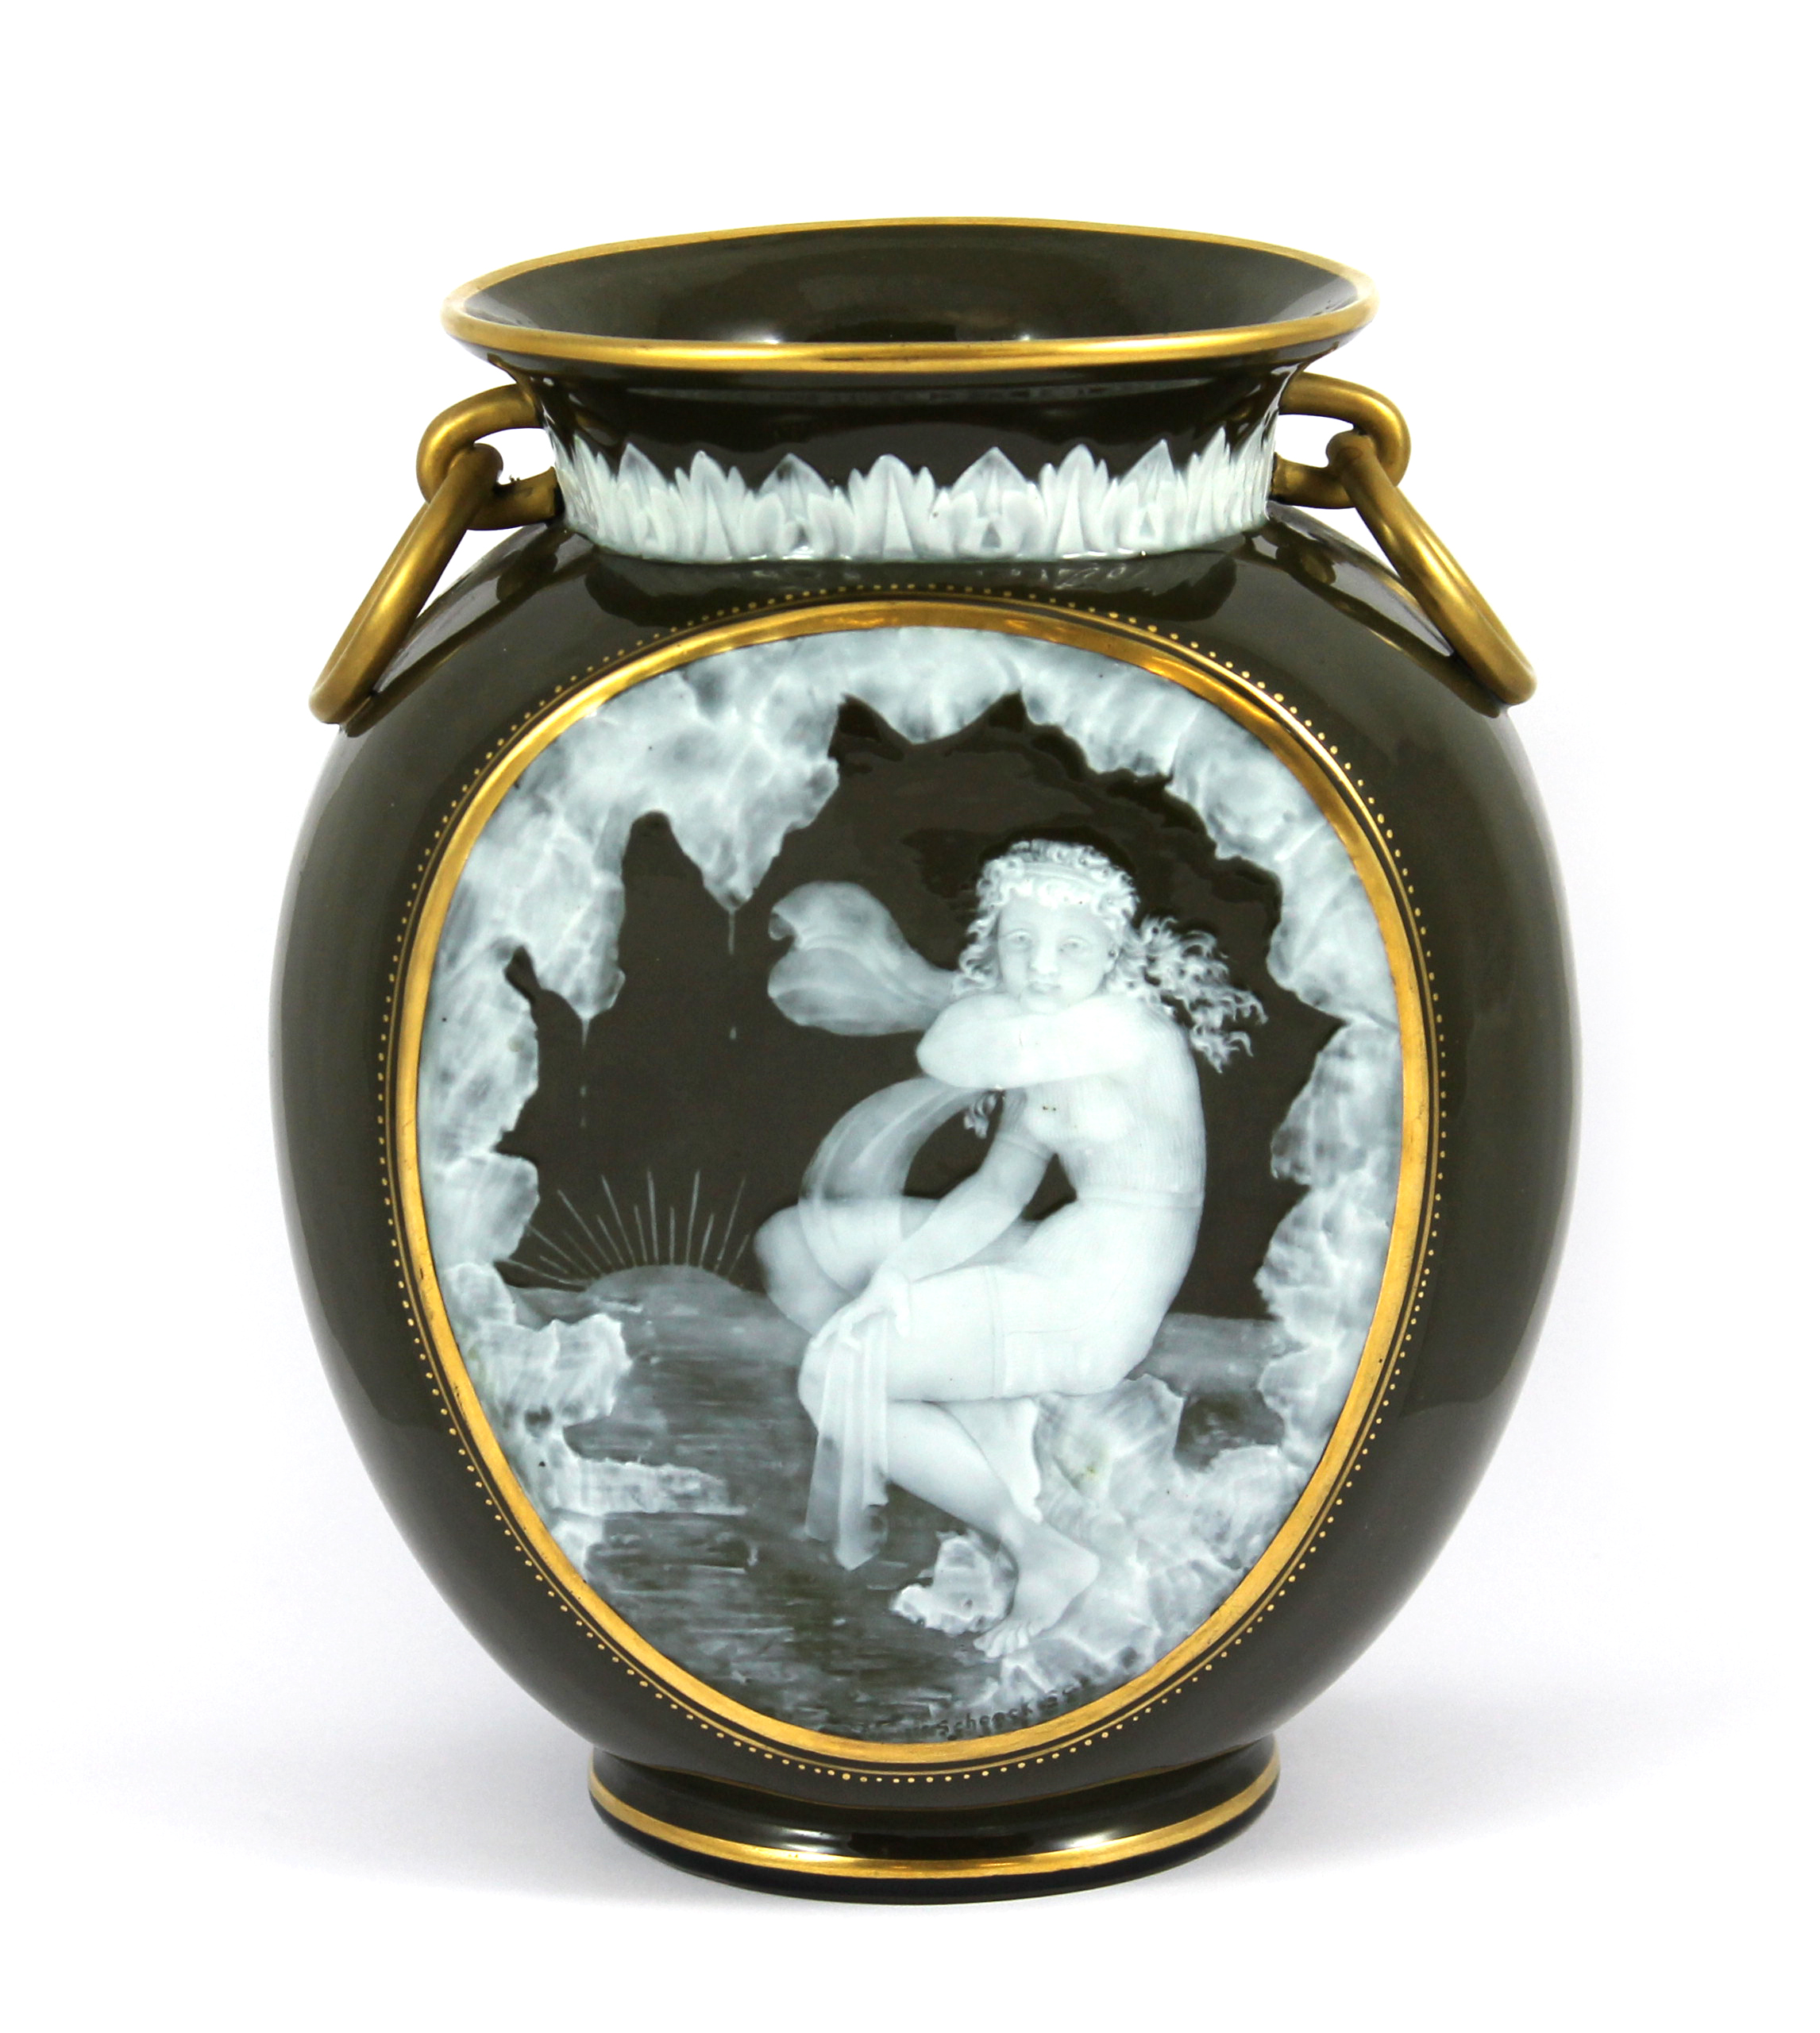 A George Jones pate- sur- pate vase, late 19th century, decorated with a siren against a seascape by